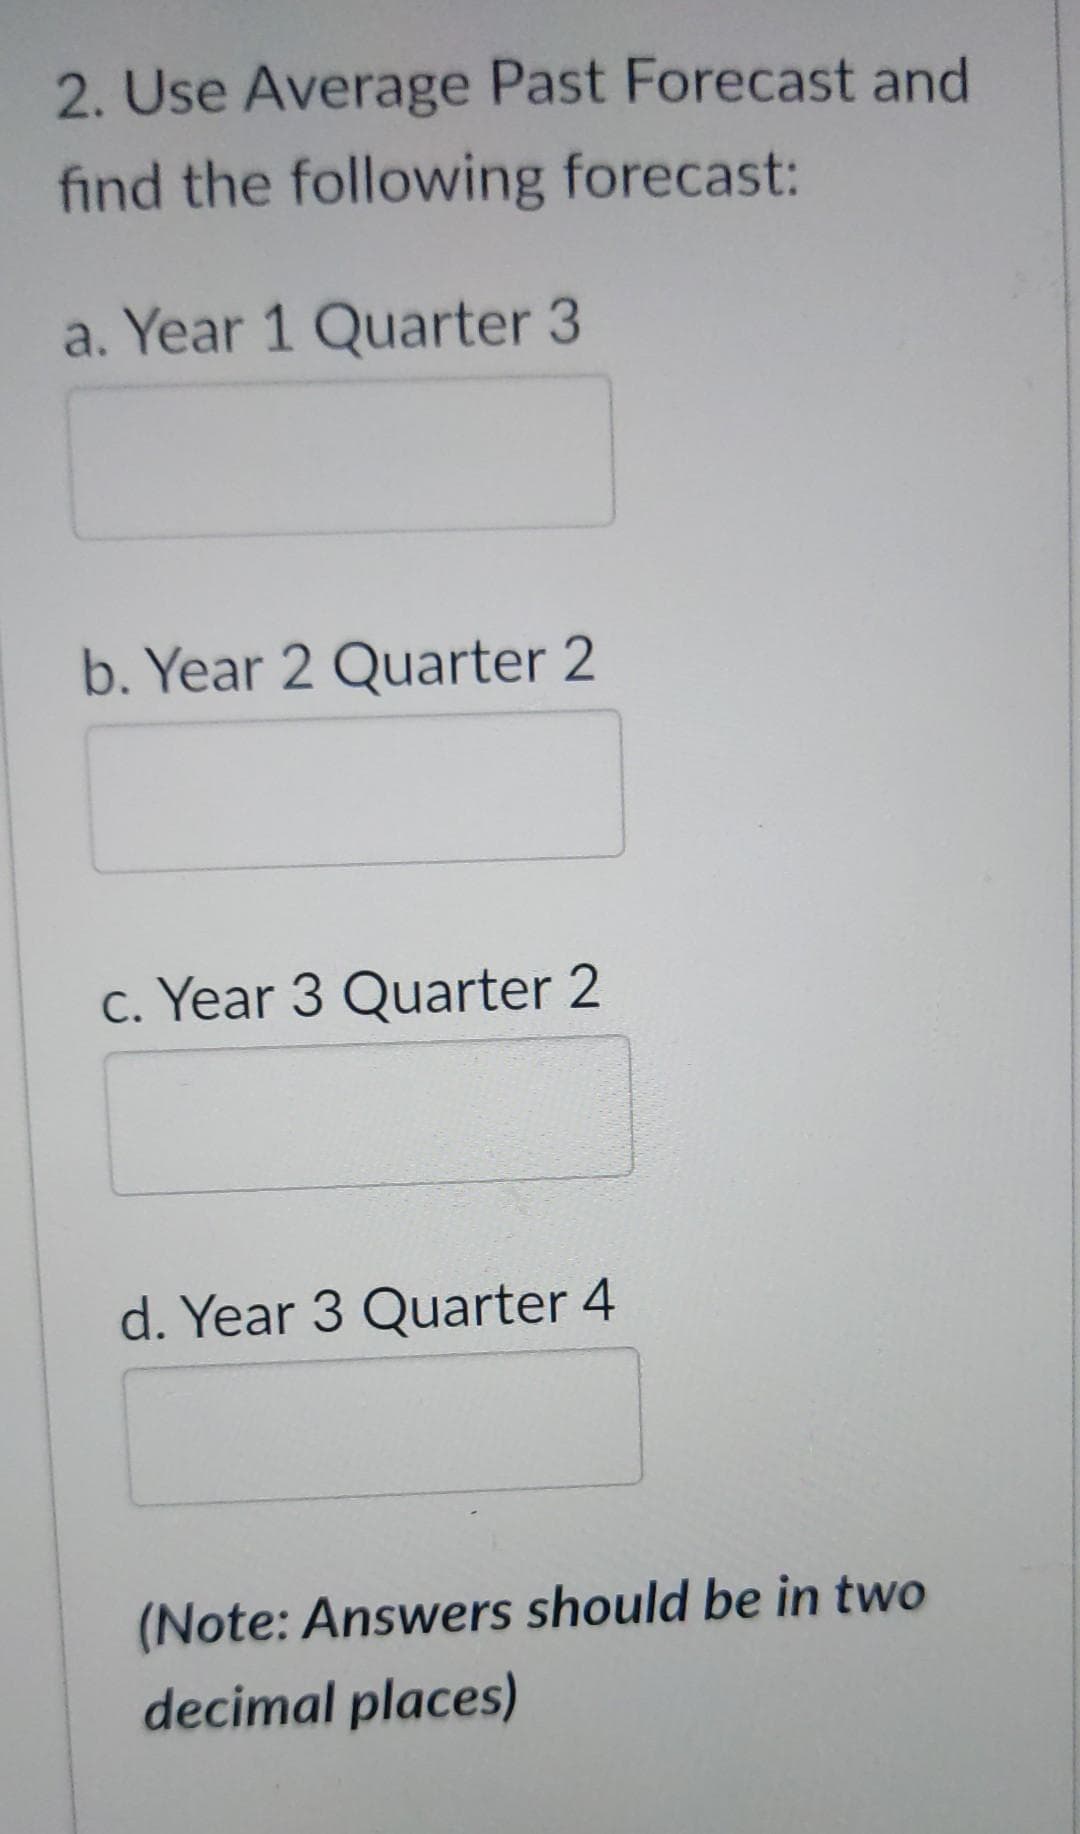 2. Use Average Past Forecast and
find the following forecast:
a. Year 1 Quarter 3
b. Year 2 Quarter 2
c. Year 3 Quarter 2
d. Year 3 Quarter 4
(Note: Answers should be in two
decimal places)
